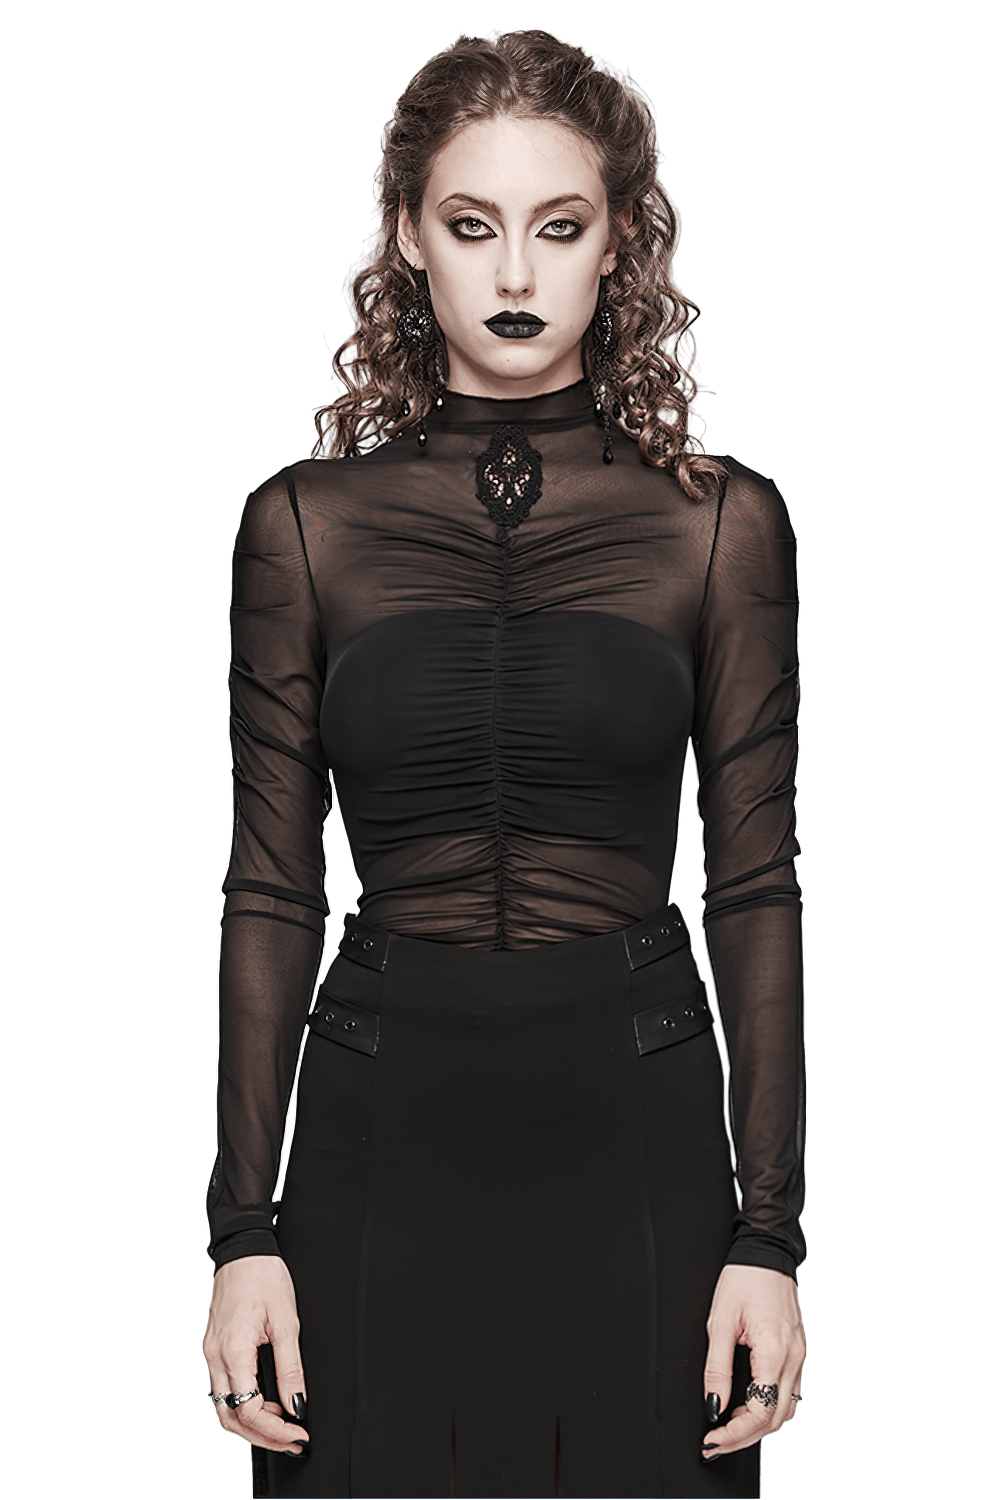 Sheer Black Mesh Top with Skeleton Embroidery